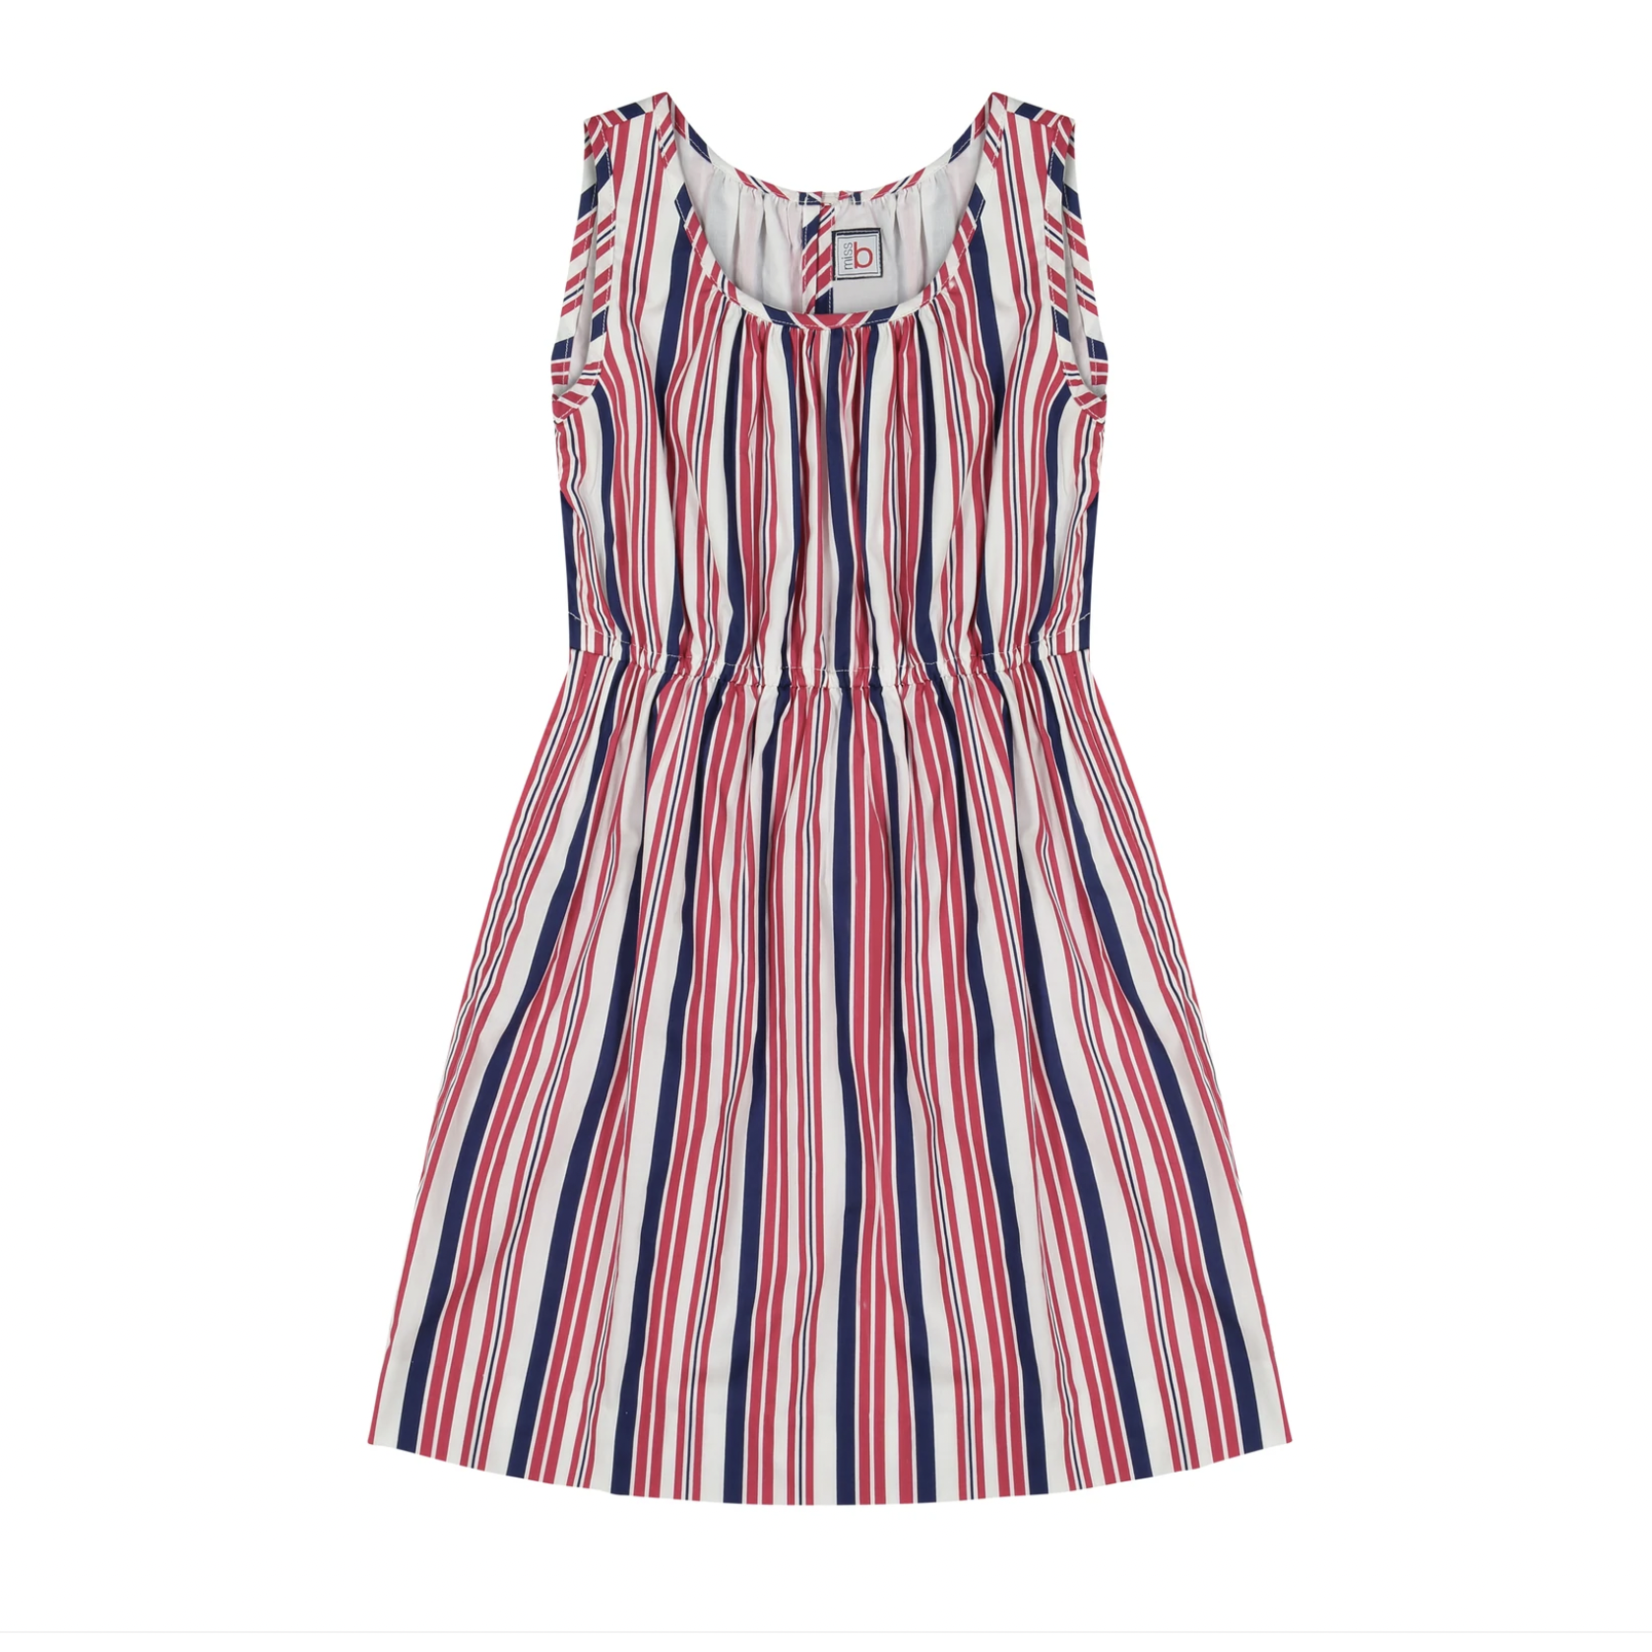 Busy Bees Kids Trudy Red/White/Navy Stripe Tank Dress